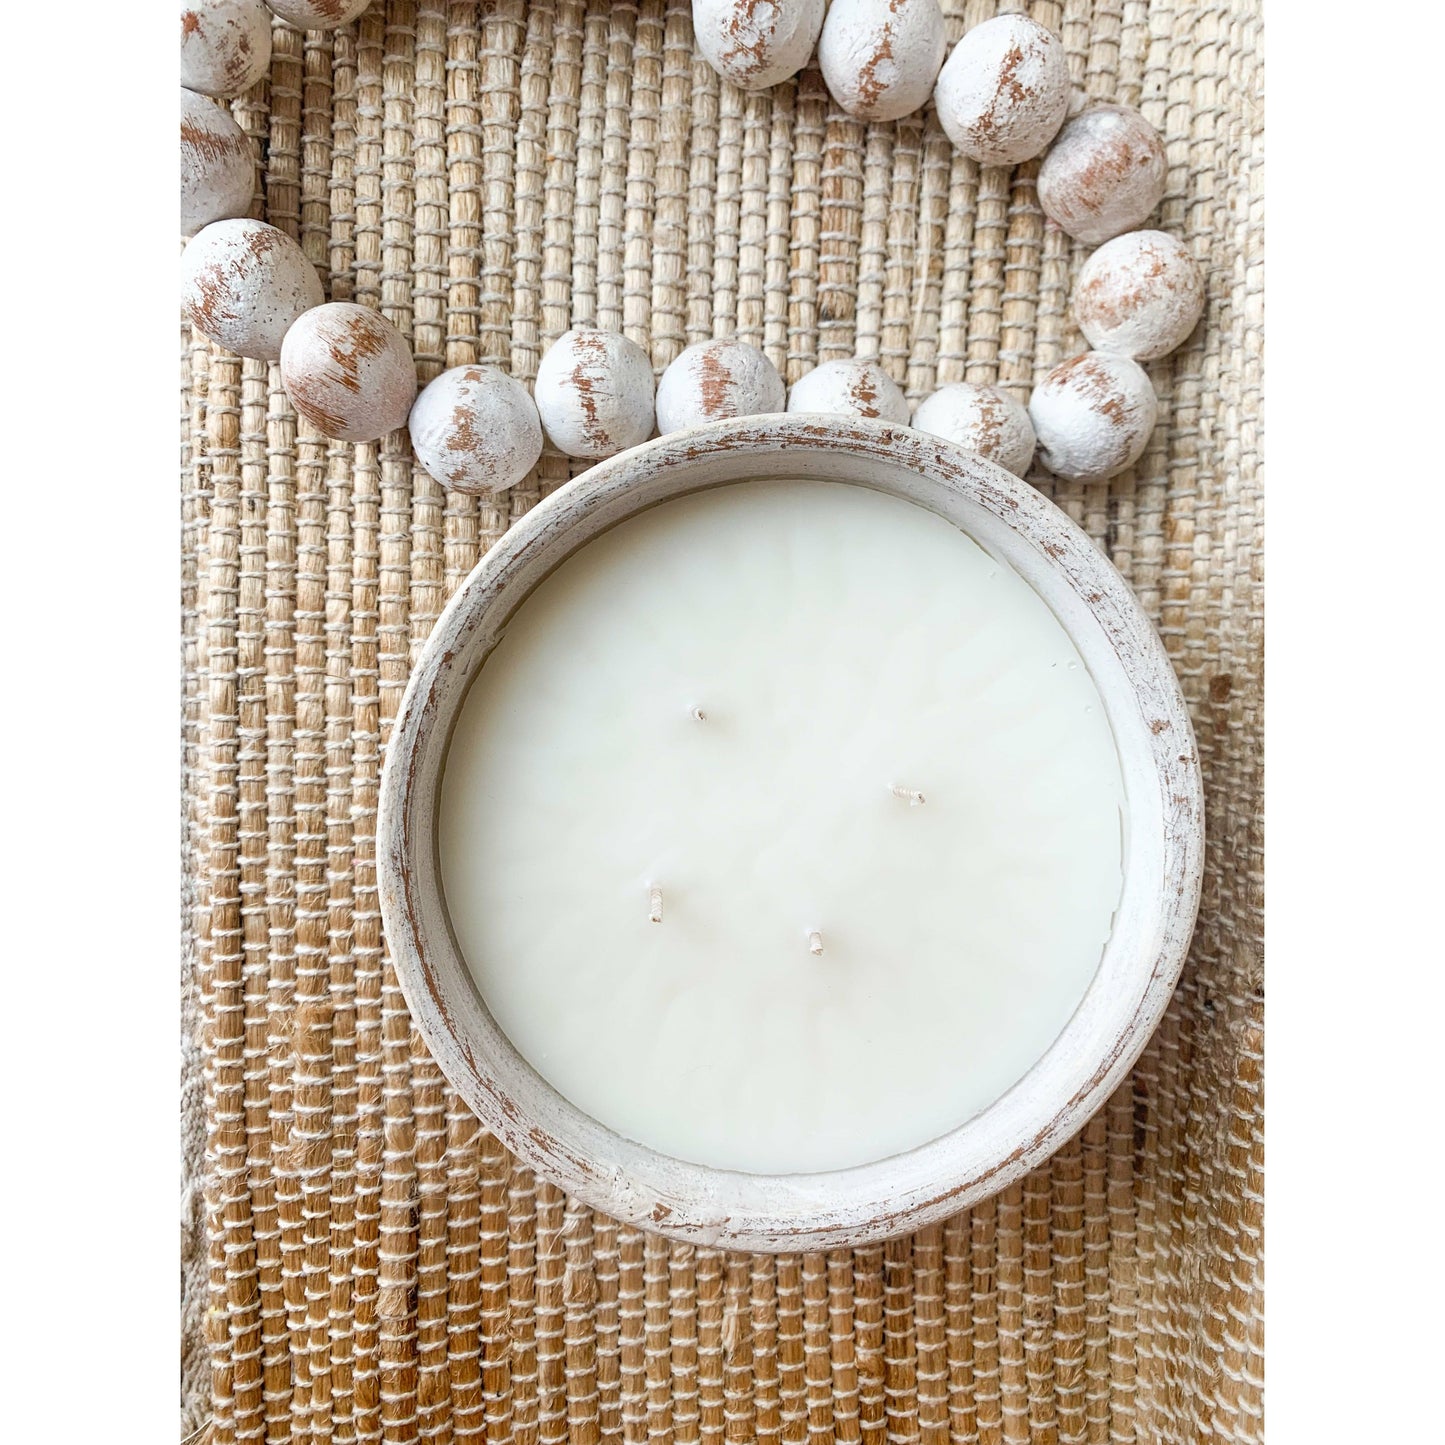 Beaded White Clay Bowl Candle